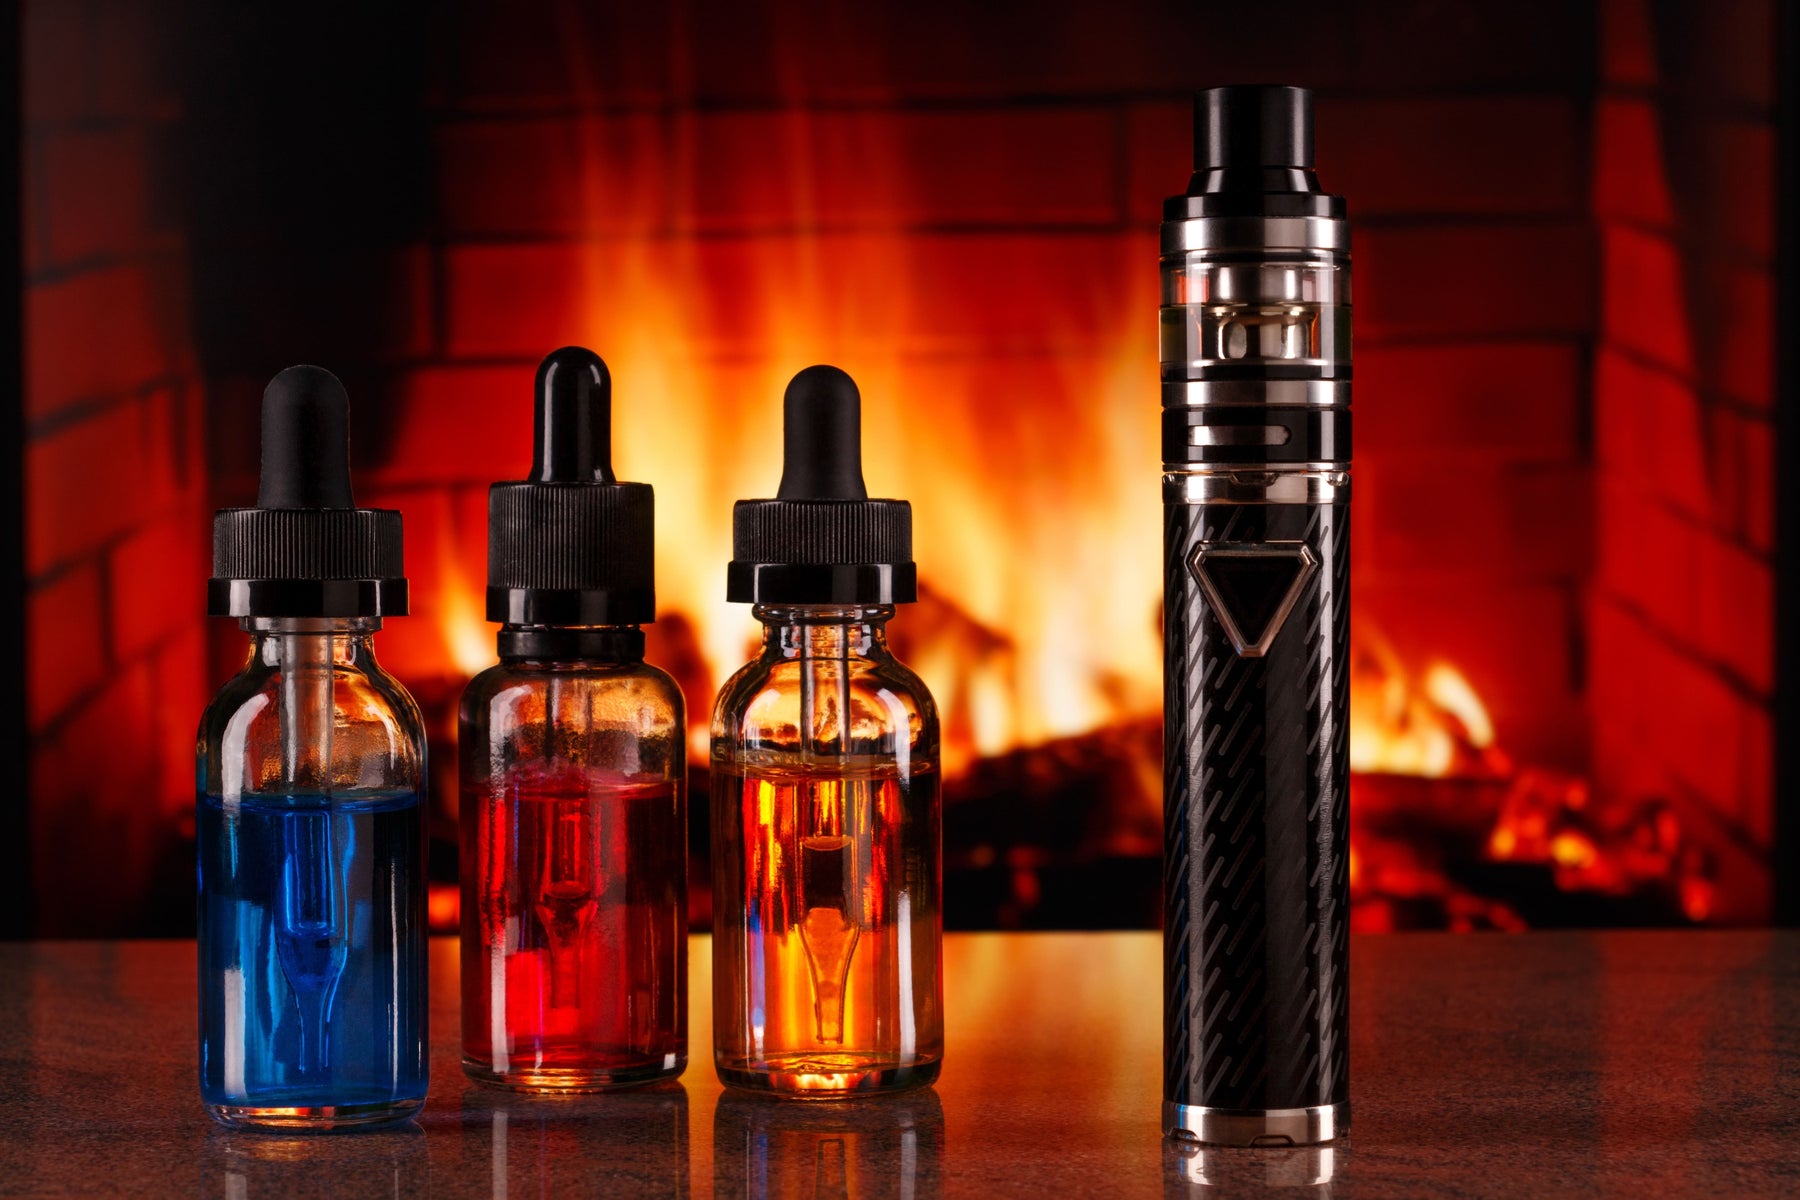 The Best Ejuice Flavors & Brands for 2019